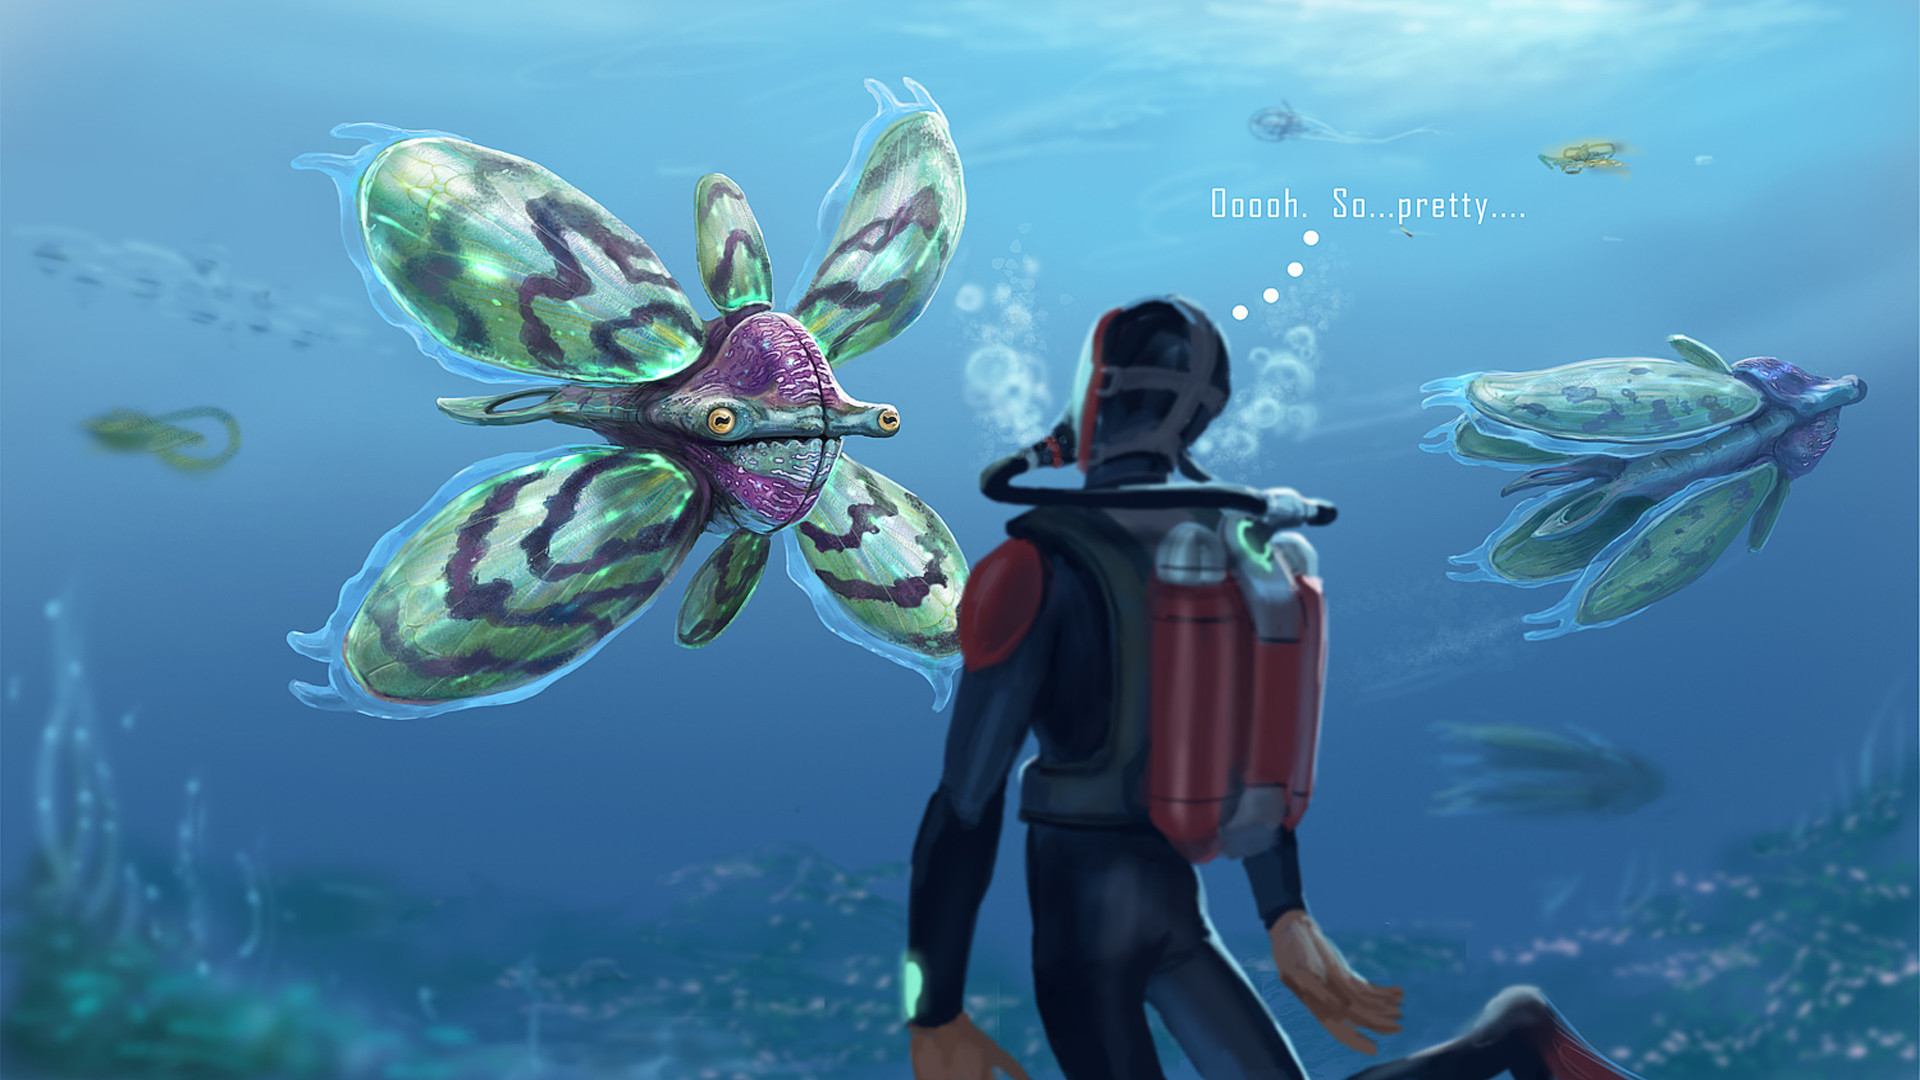 Wallpaper monster, being, Subnautica, suplicy images for desktop, section  игры - download